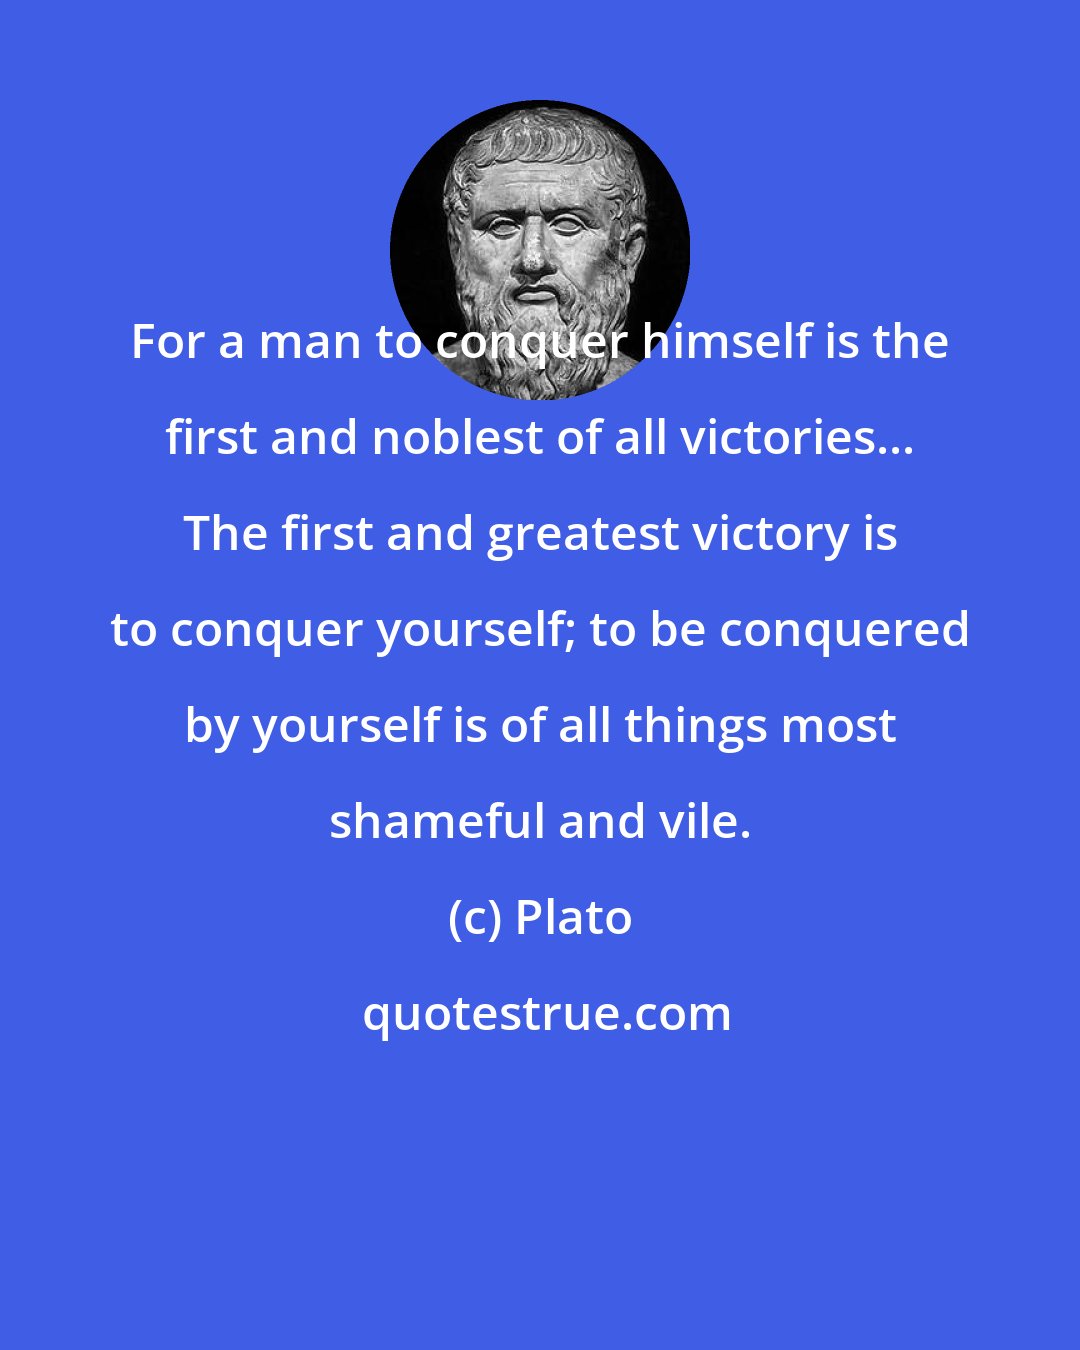 Plato: For a man to conquer himself is the first and noblest of all victories... The first and greatest victory is to conquer yourself; to be conquered by yourself is of all things most shameful and vile.